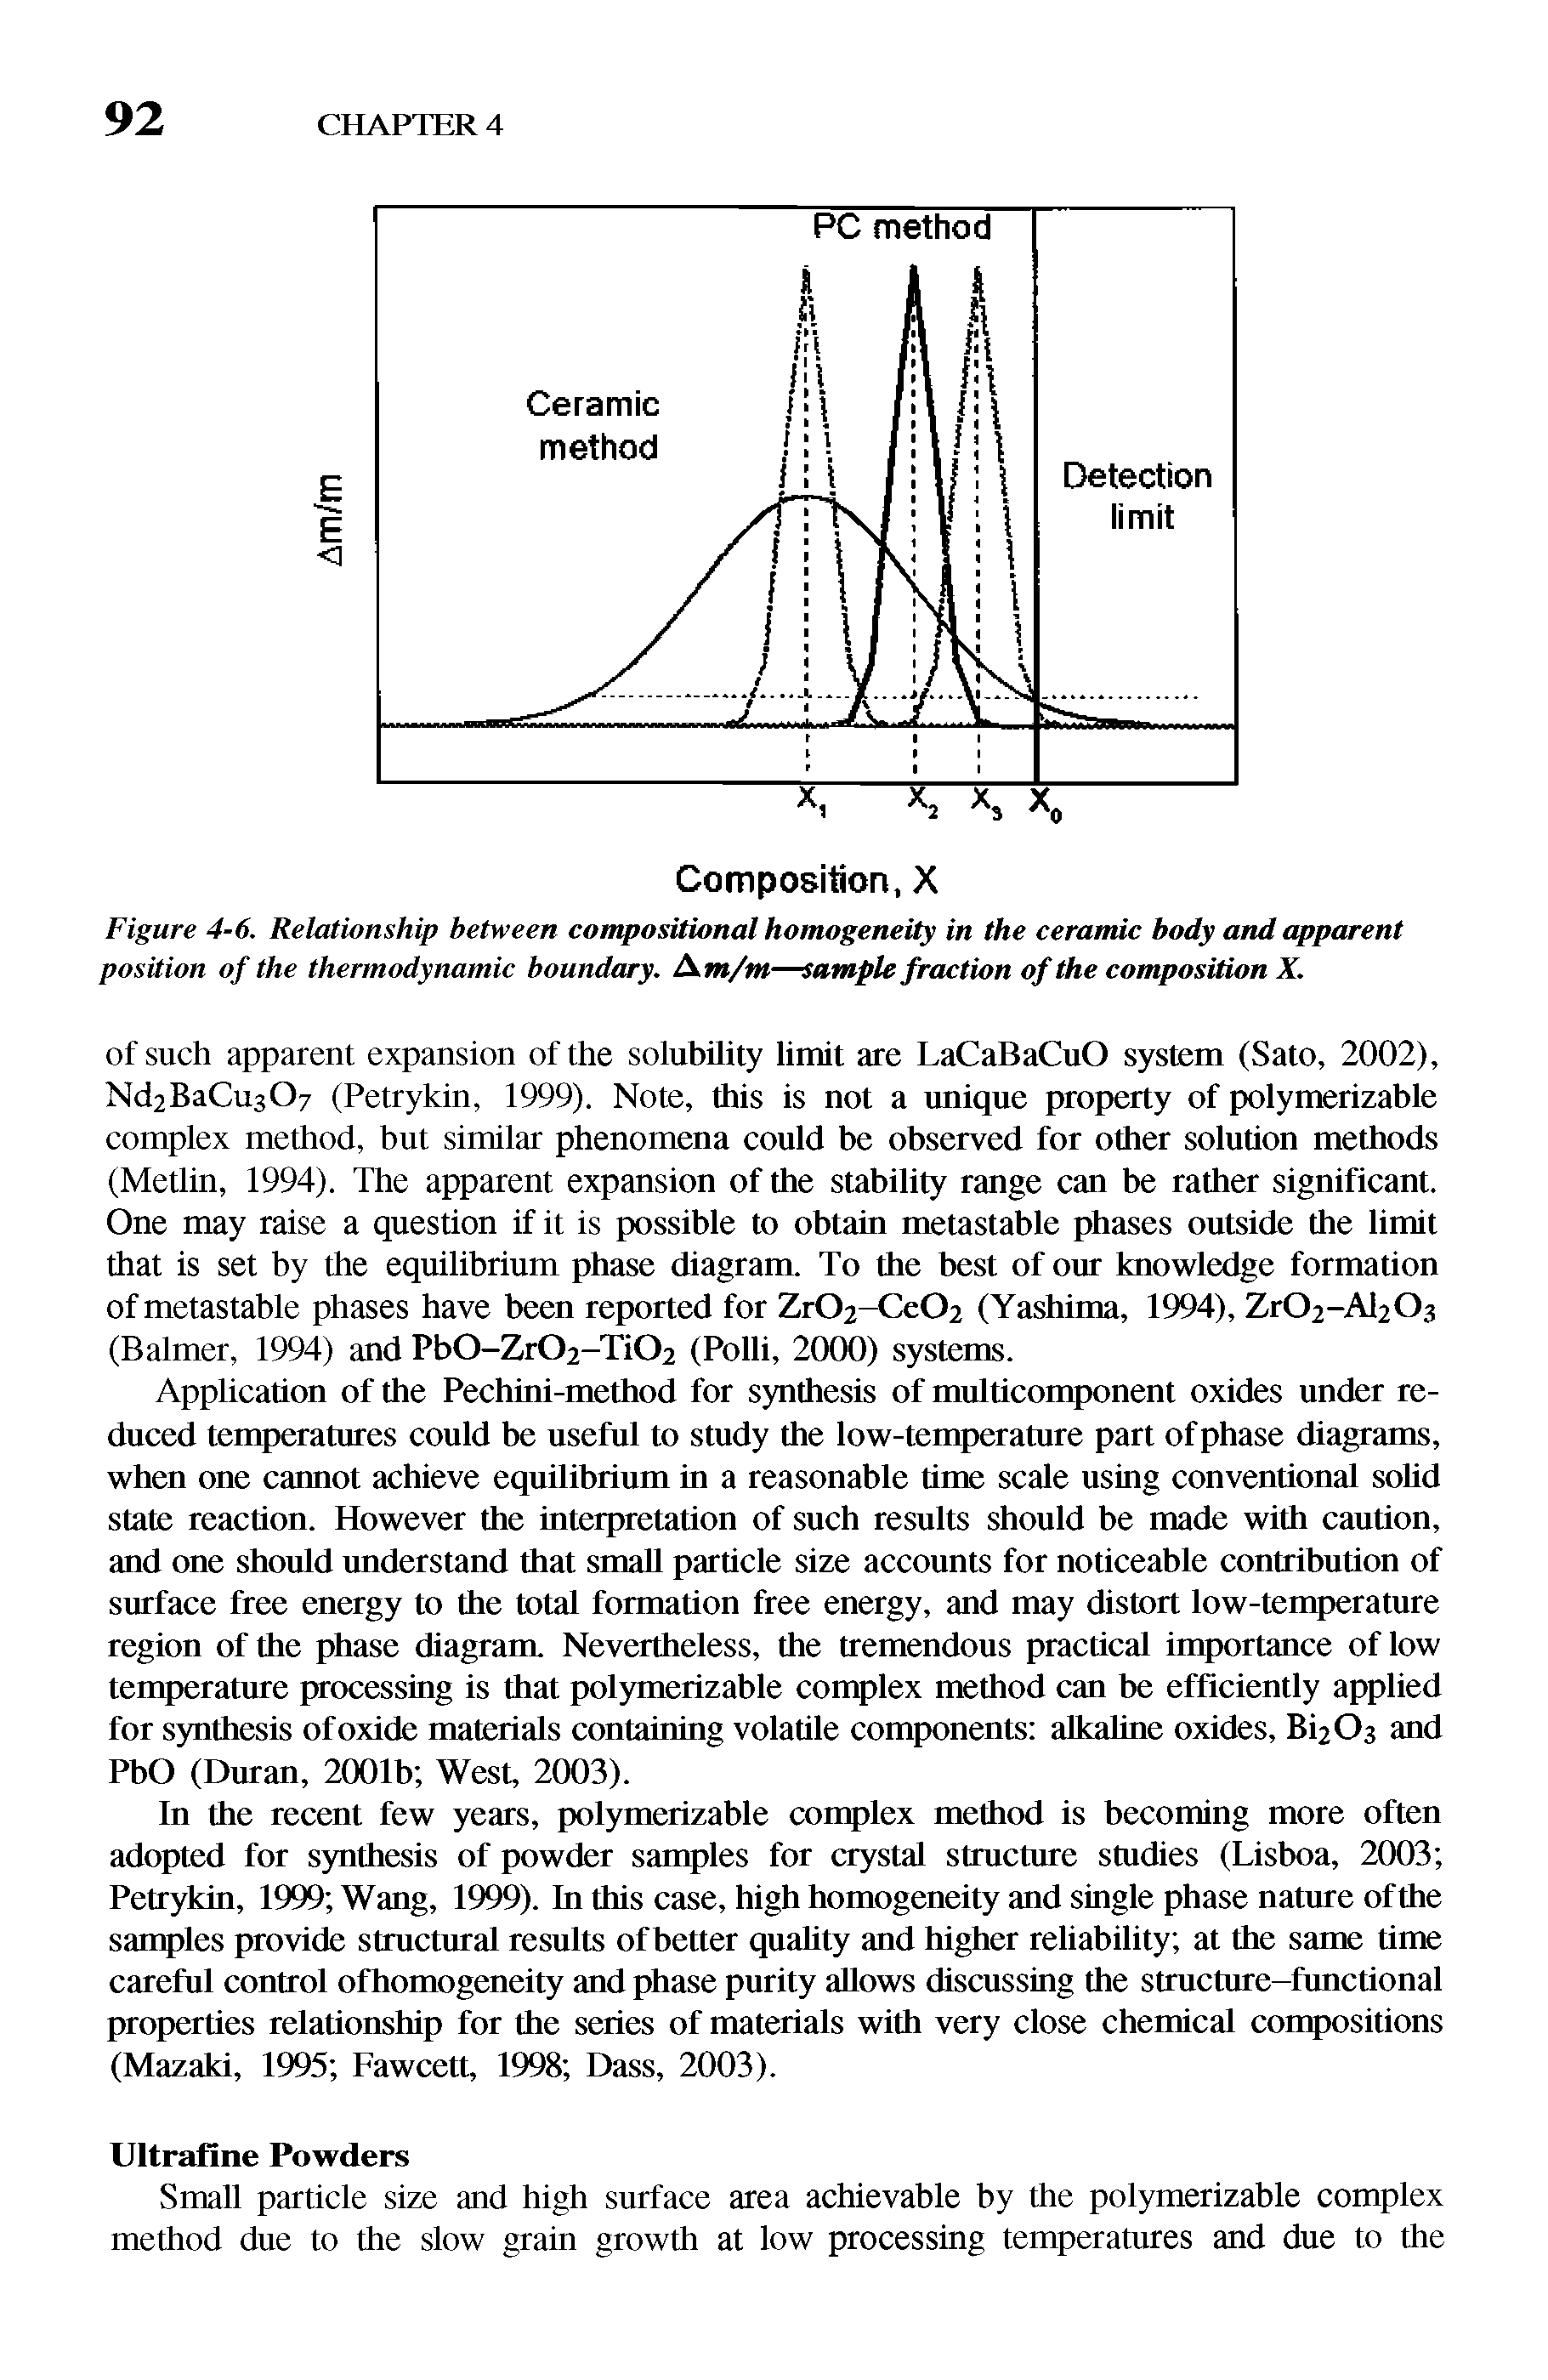 Figure 4-6. Relationship between compositional homogeneity in the ceramic body and apparent position of the thermodynamic boundary. Am/w—sample fraction of the composition X.